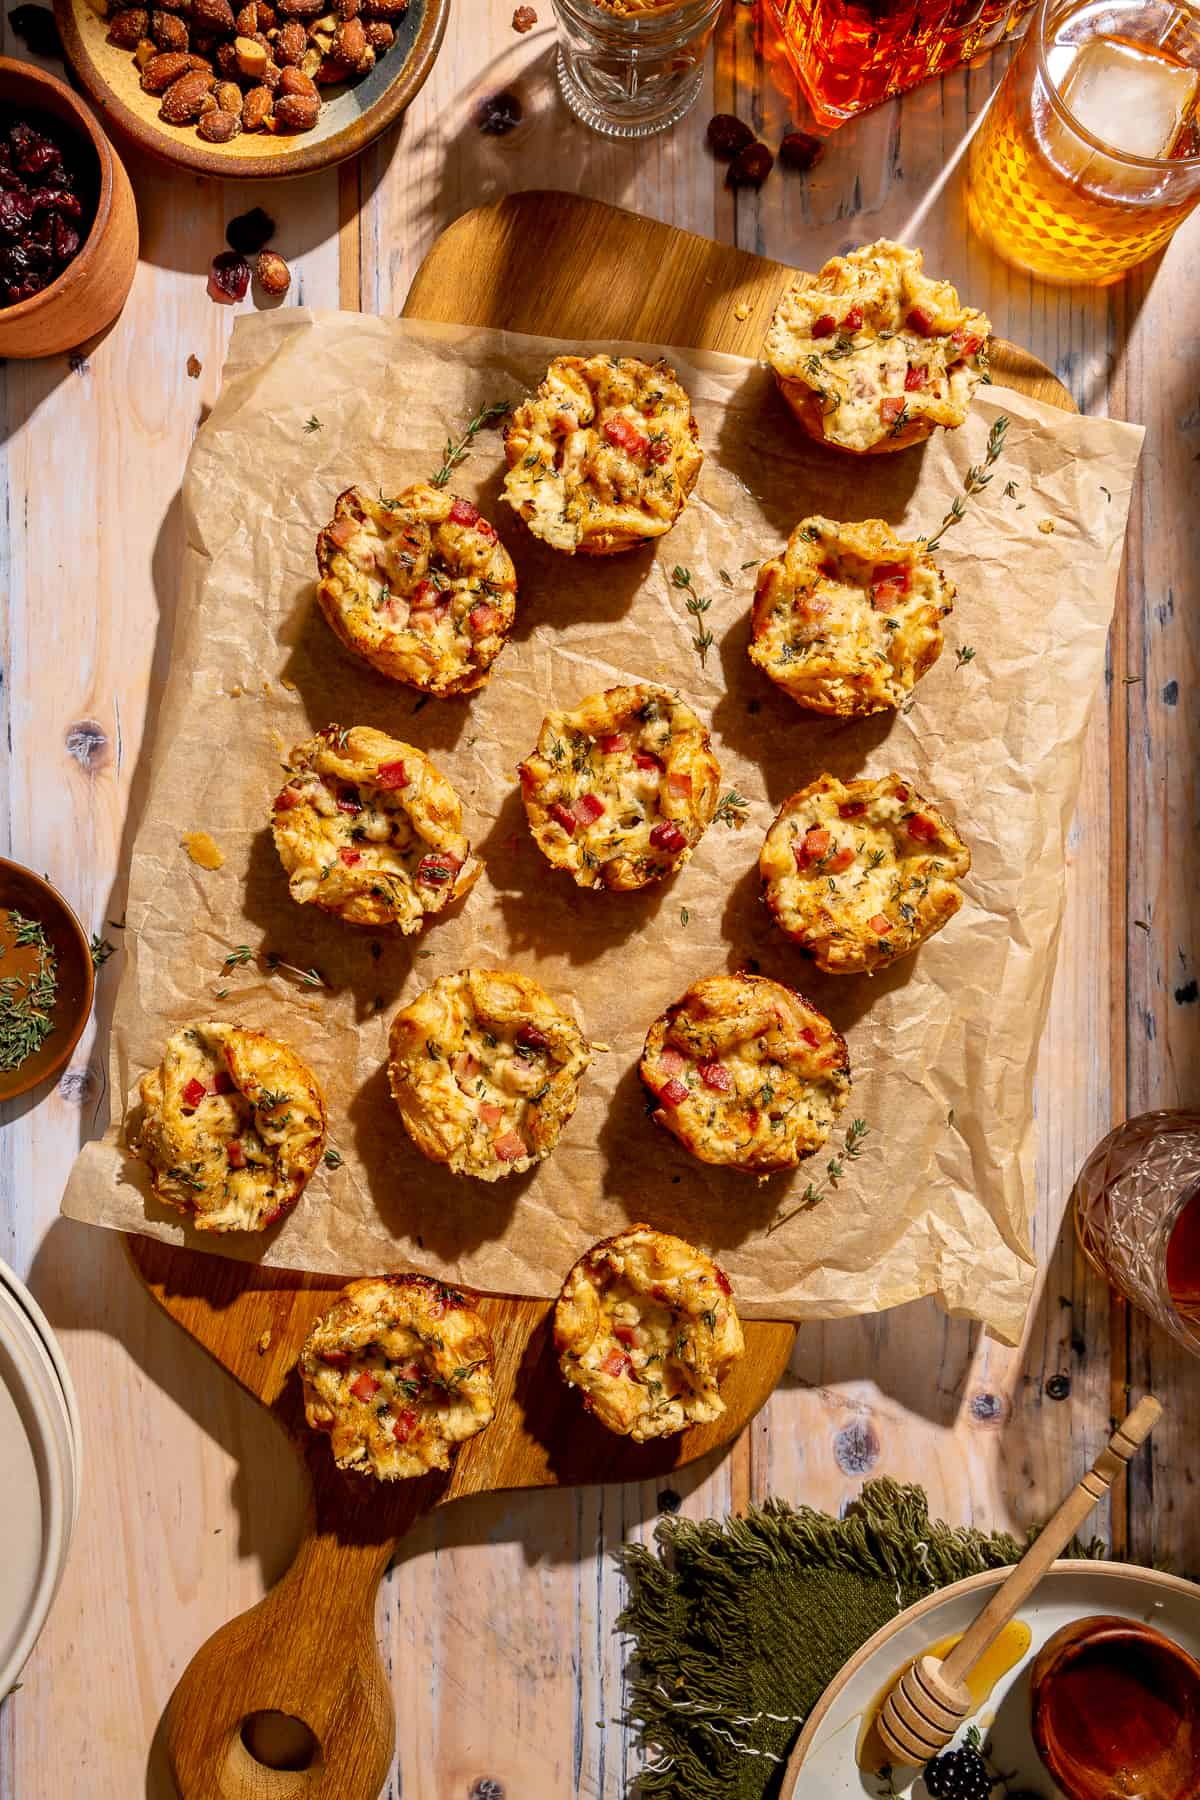 Mini Croque Monsieur Bites on wooden cutting board. Other appetizers and cocktails peeking in from top corners.